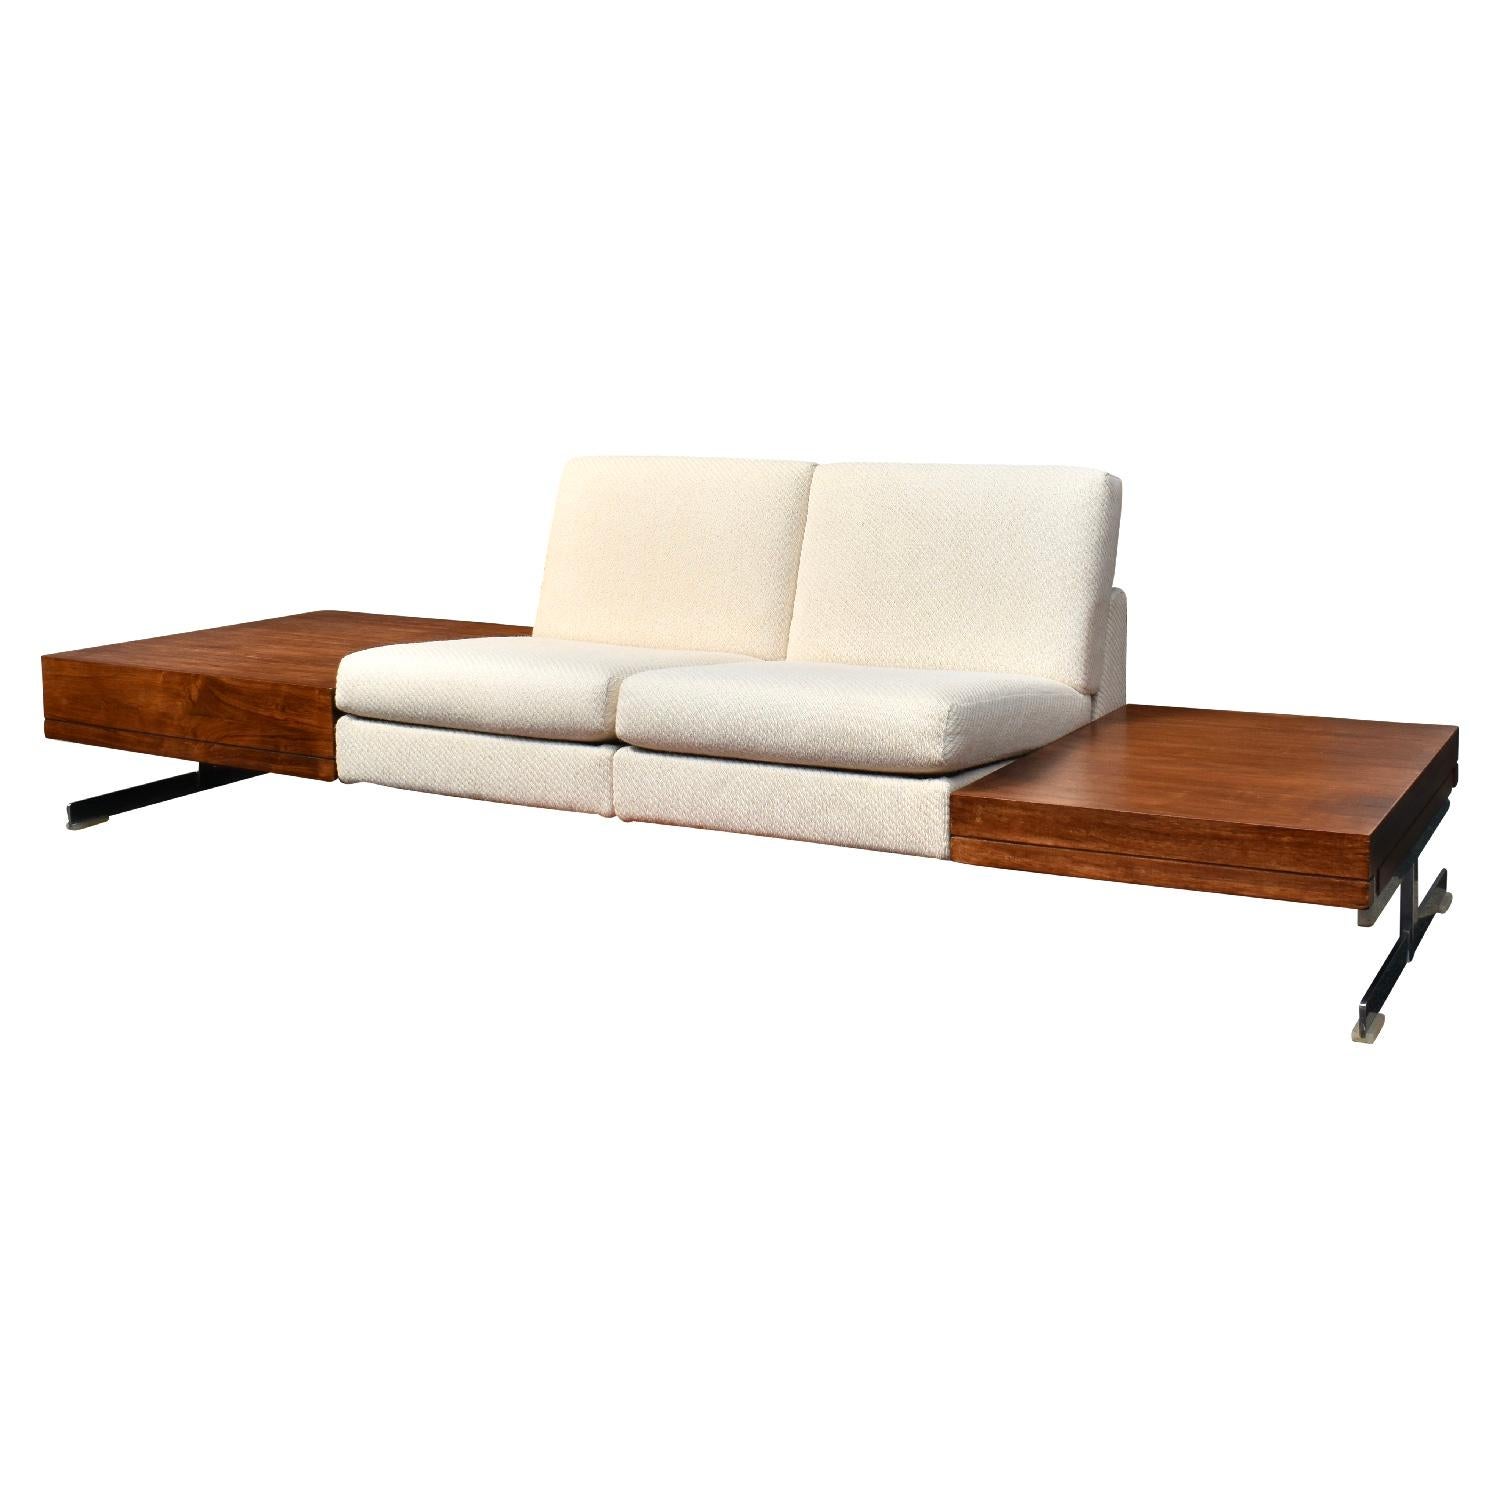 German Rolf Benz First Edition Pluraform Sofa with Rosewood Coffee Tables, 1964